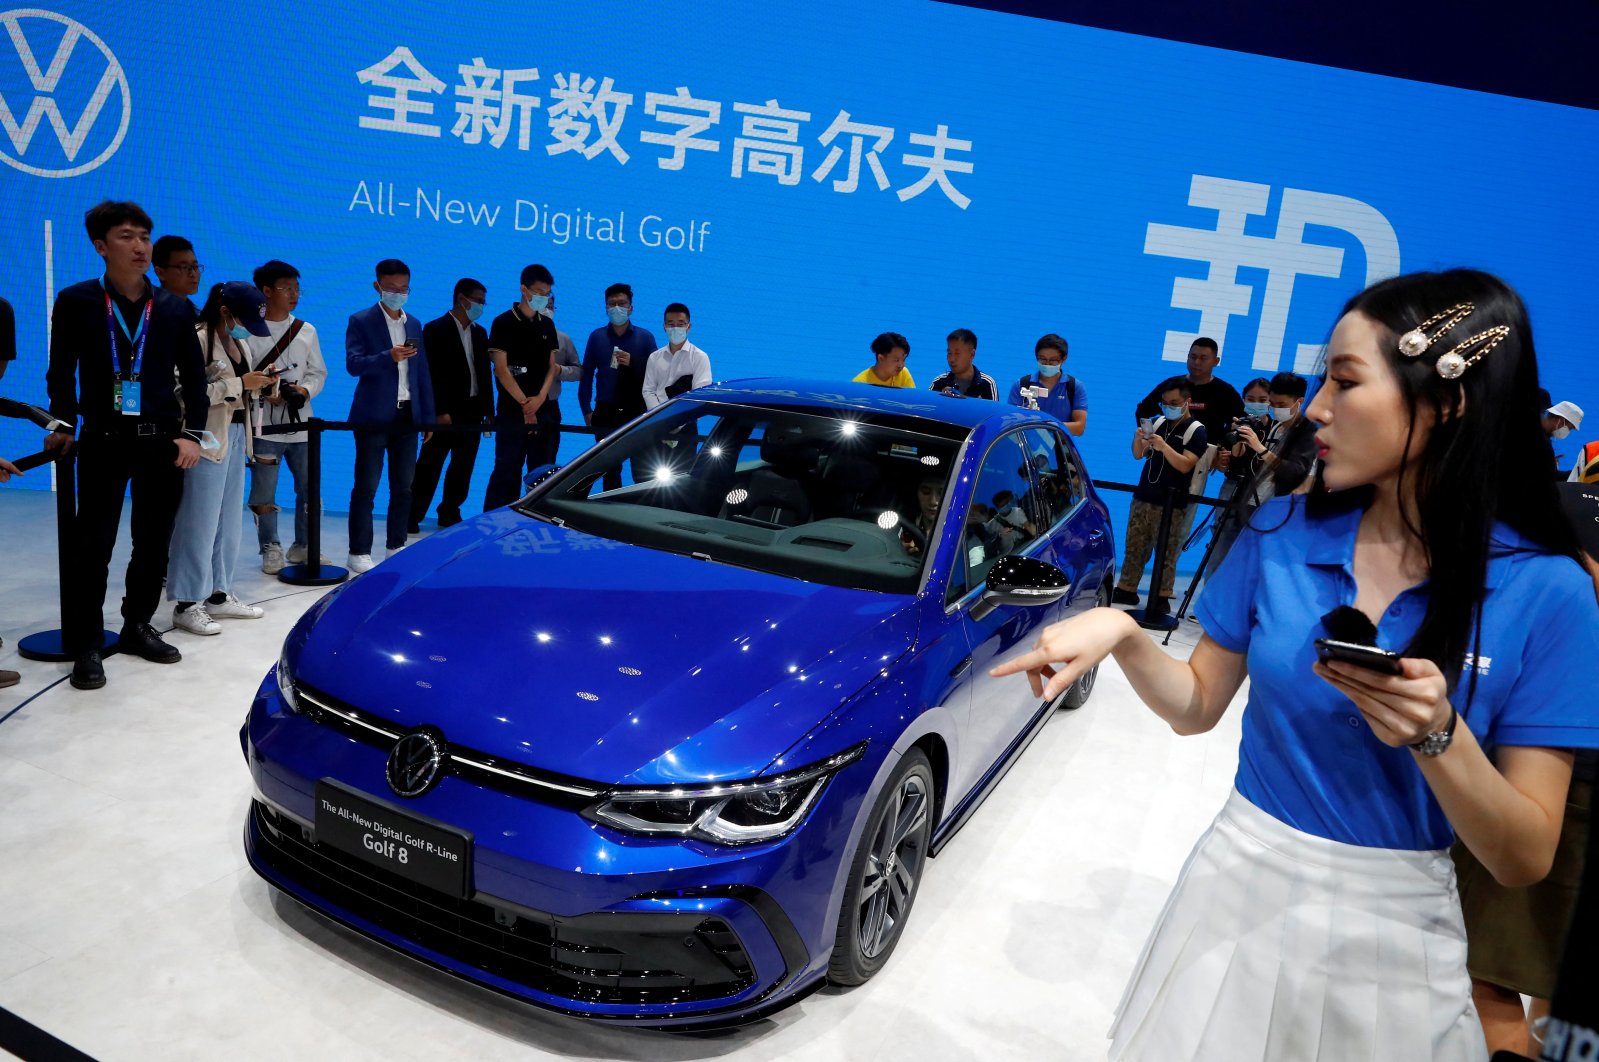 The new Volkswagen Golf 8 is seen at the Beijing International Automotive Exhibition, or Auto China show, Beijing, China, Sept. 26, 2020. (Reuters Photo)